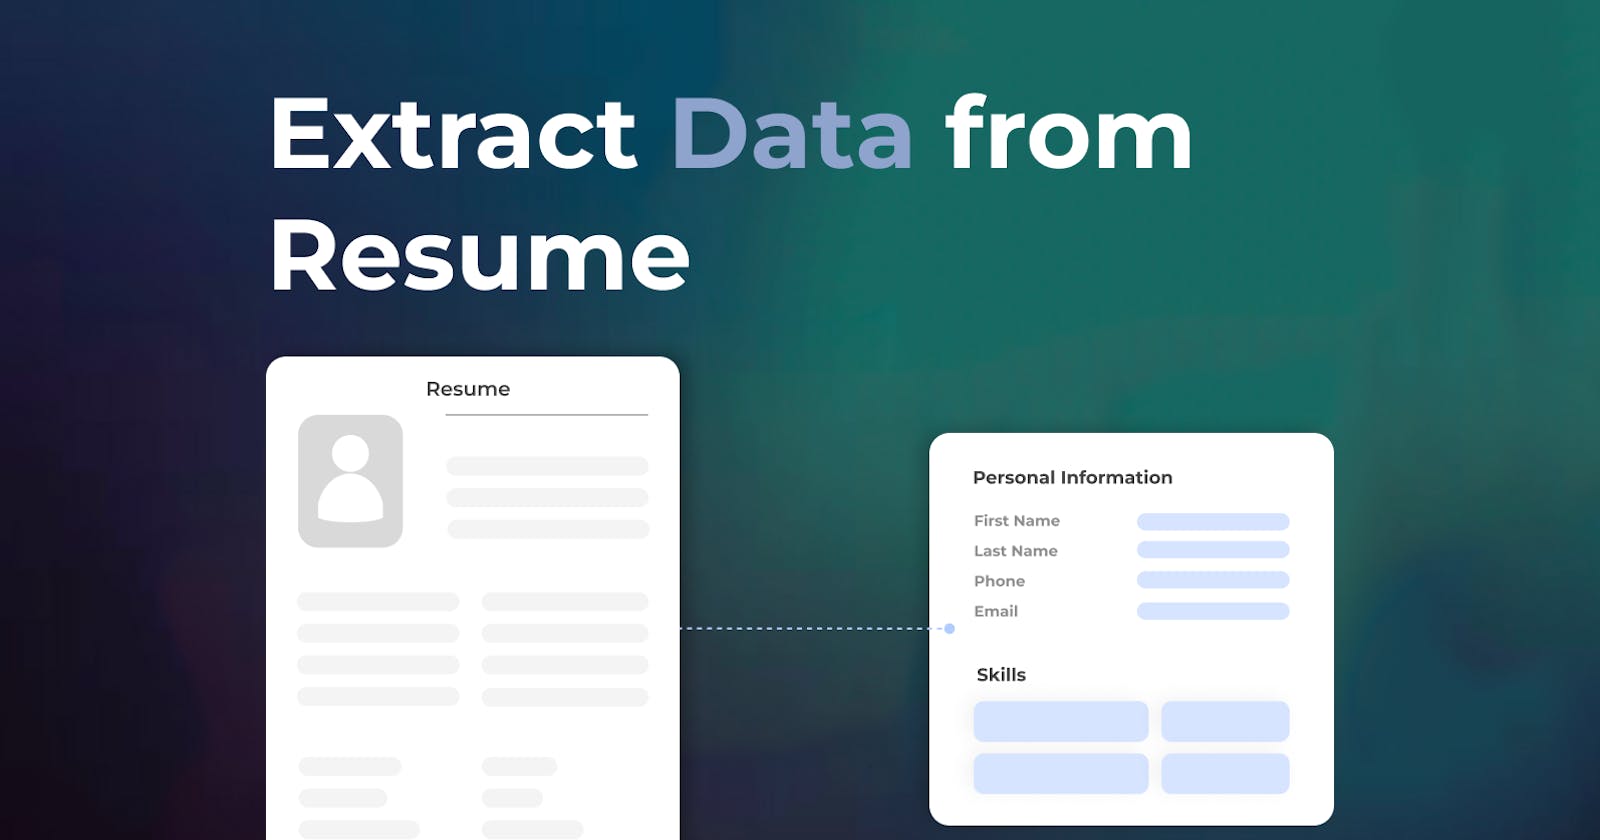 How to extract data from a resume/CV